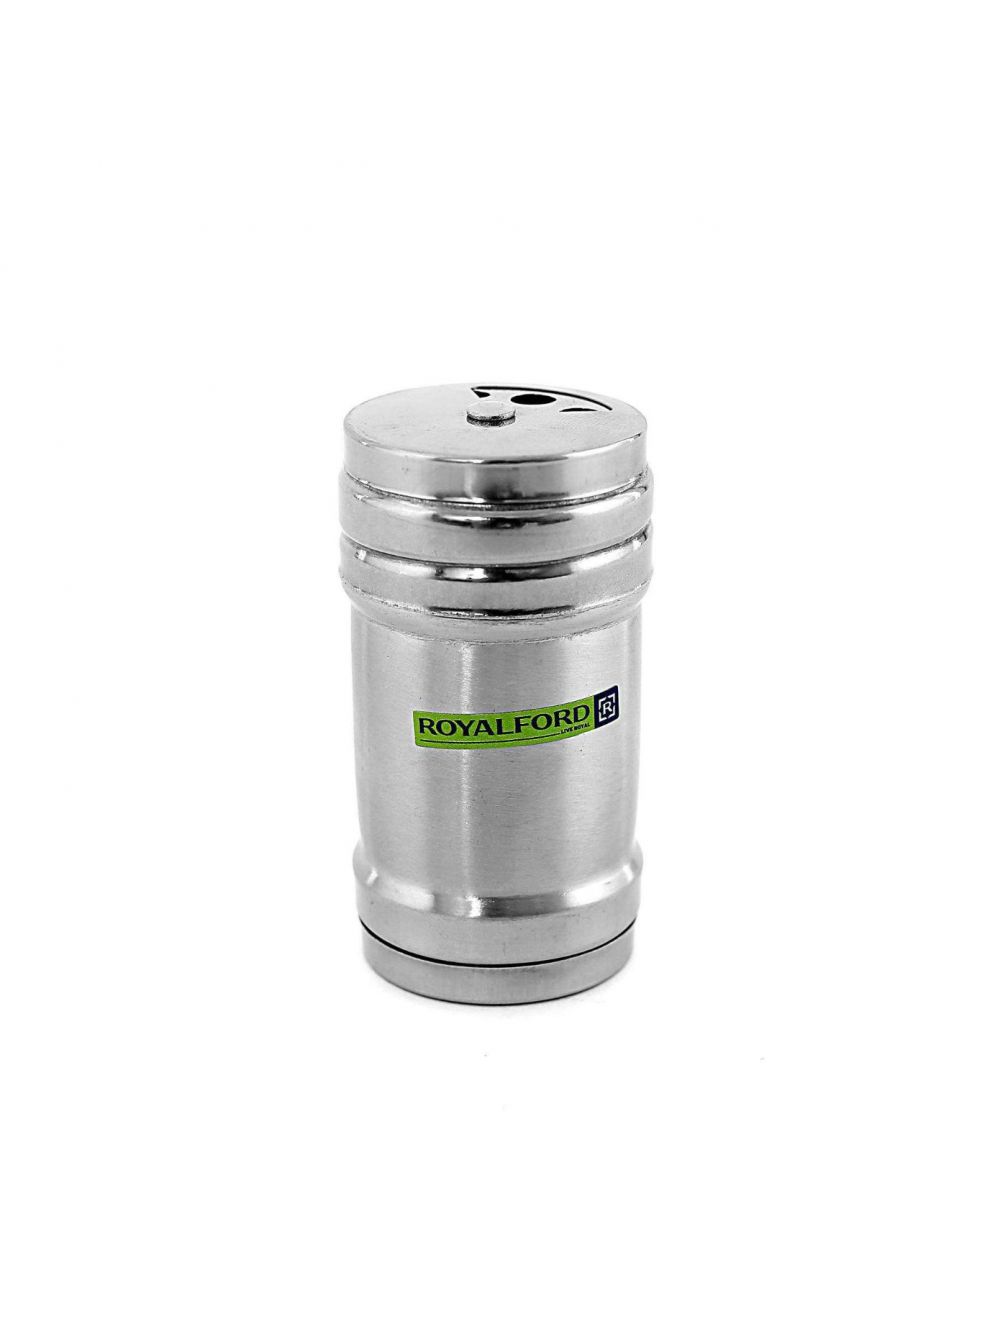 Royalford RF8736 Stainless Steel Spice Holder